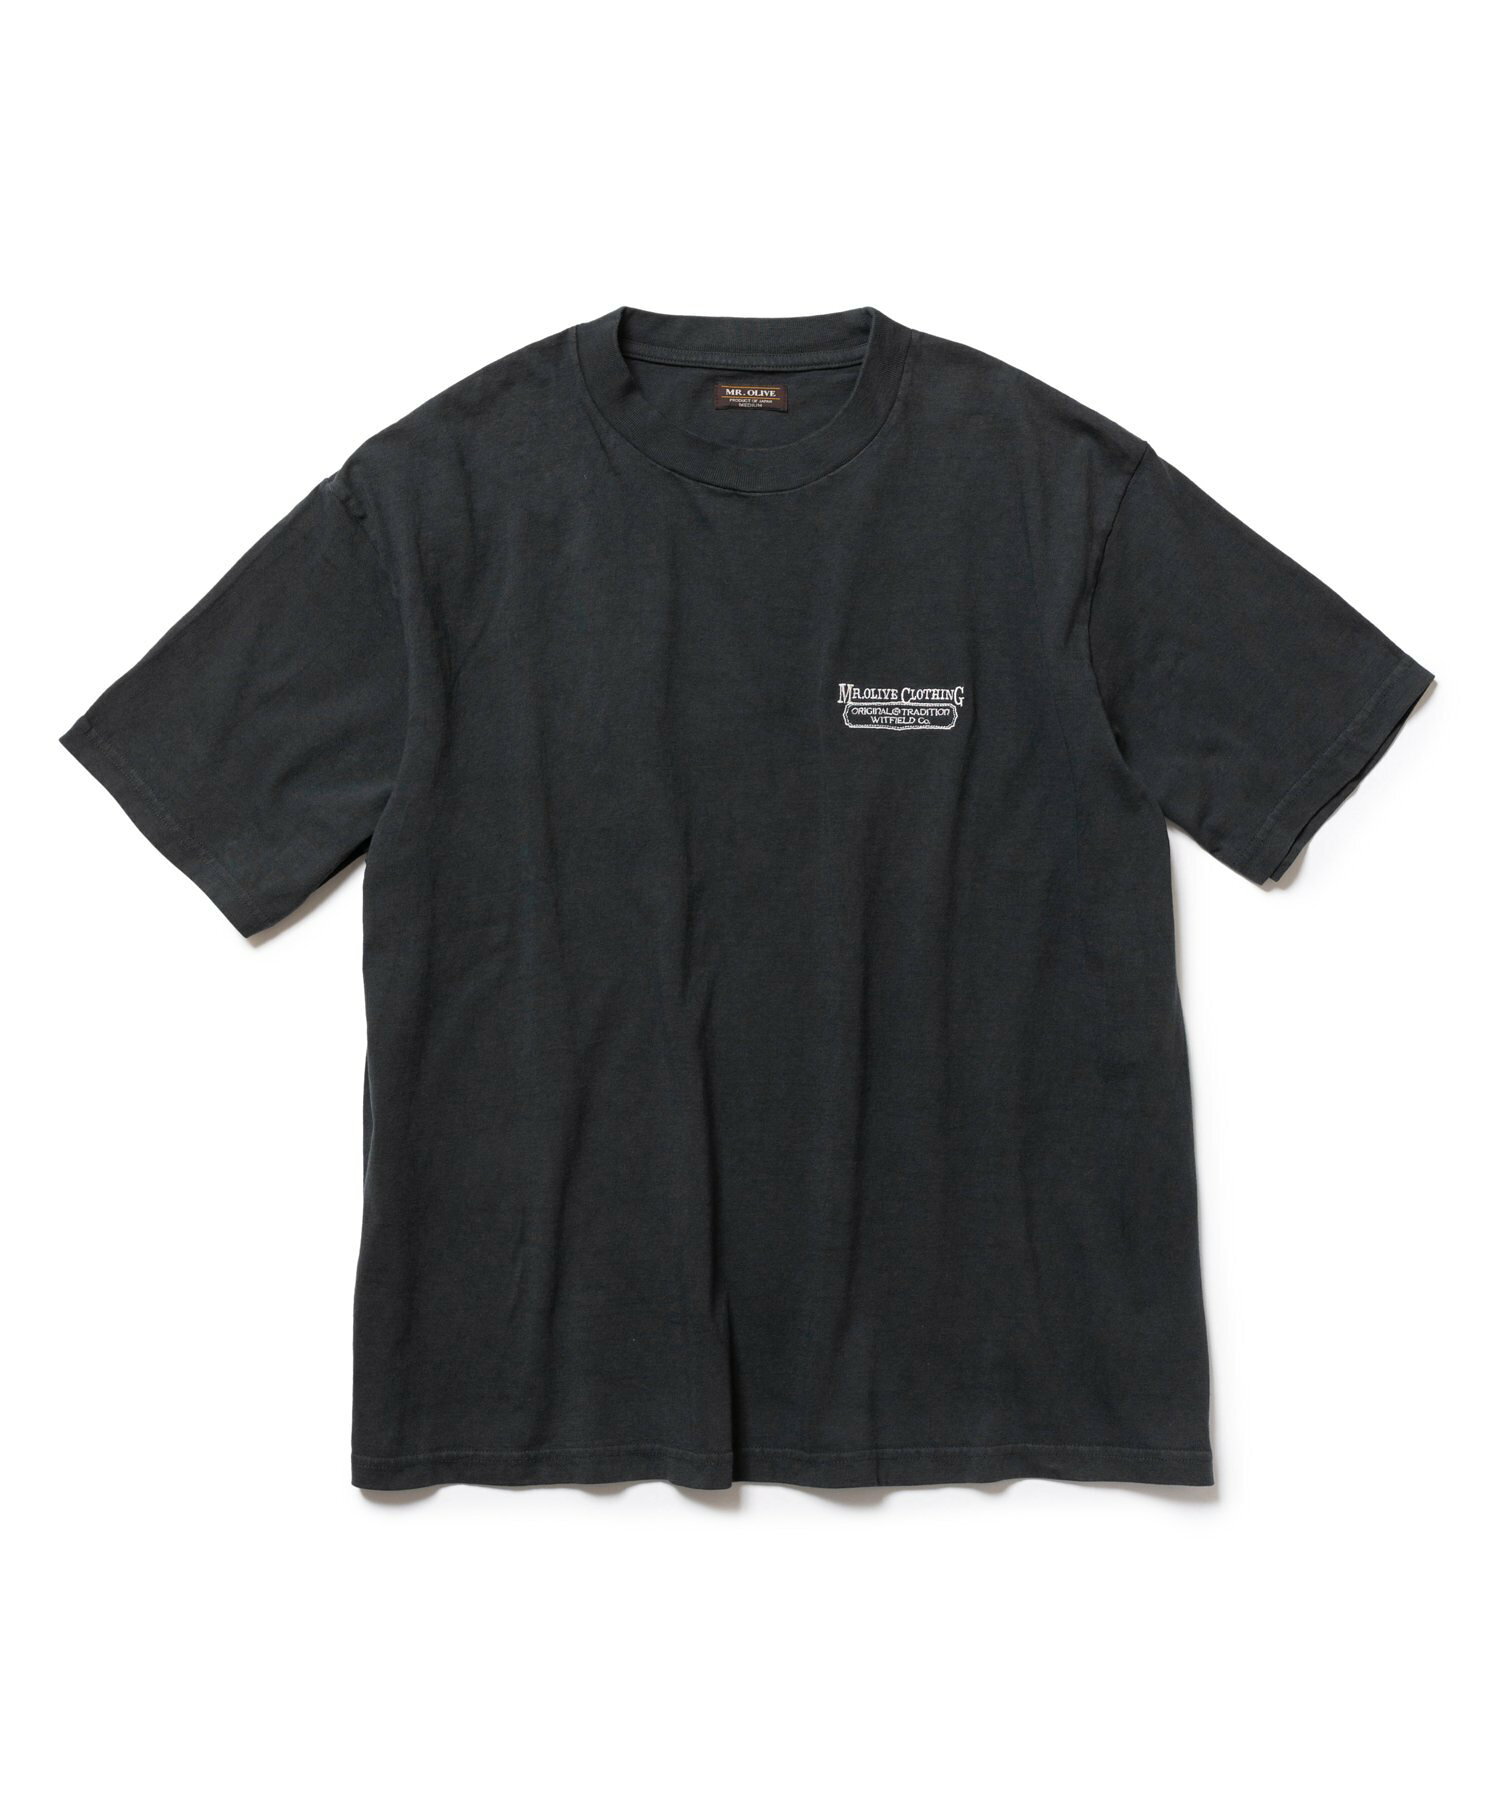 SULFUR DYES 12/1 EMERALD COTTON / EMBROIDERY CREW T-SHIRT